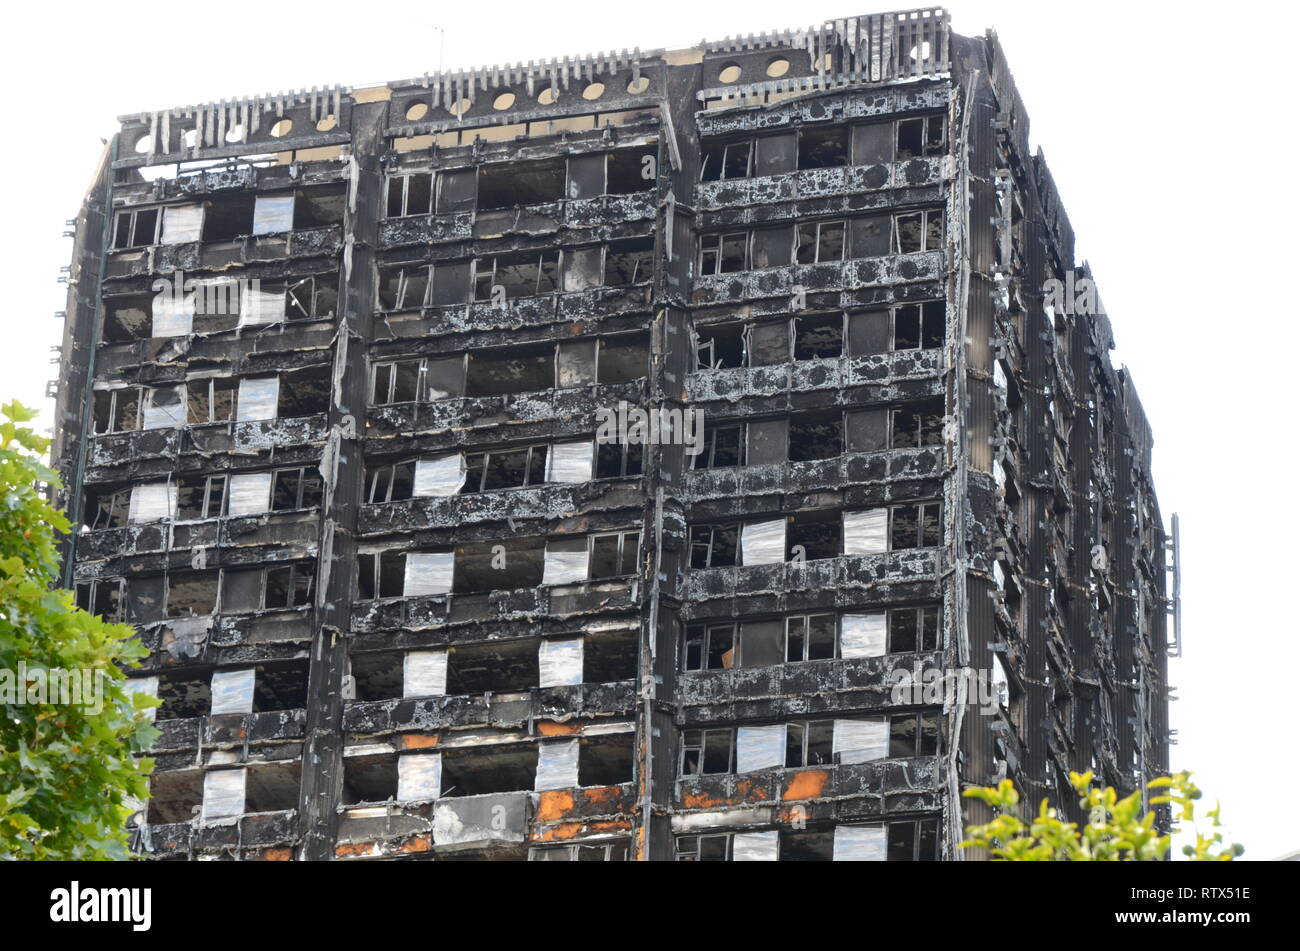 Grenfell tower fire, London, disaster zone Stock Photo